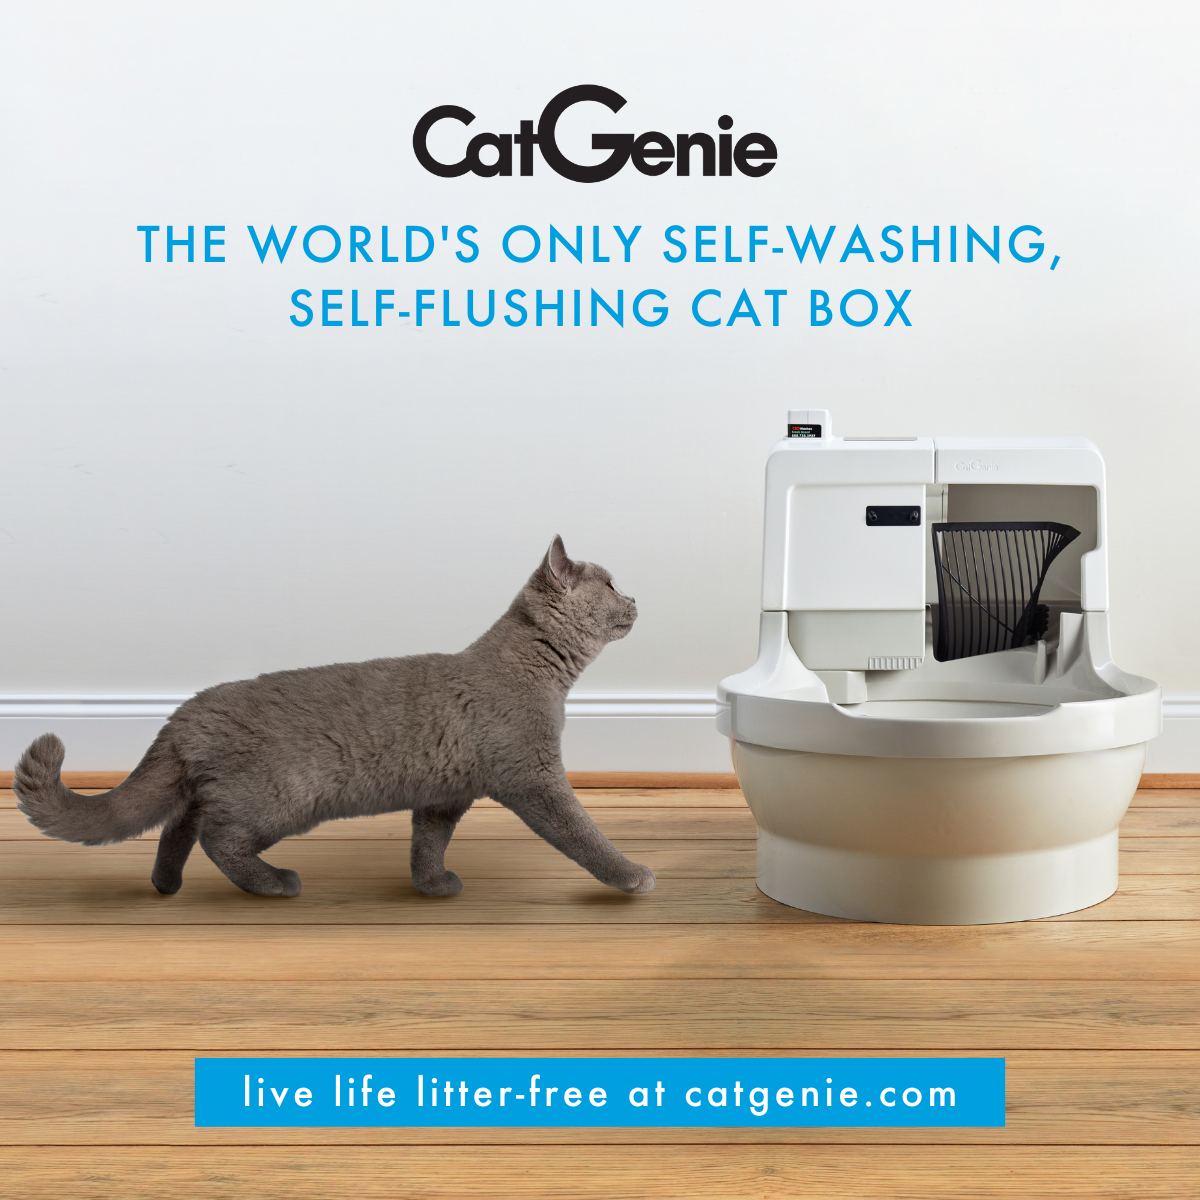 Delivery Subscription: Health Monitoring Cat Litter